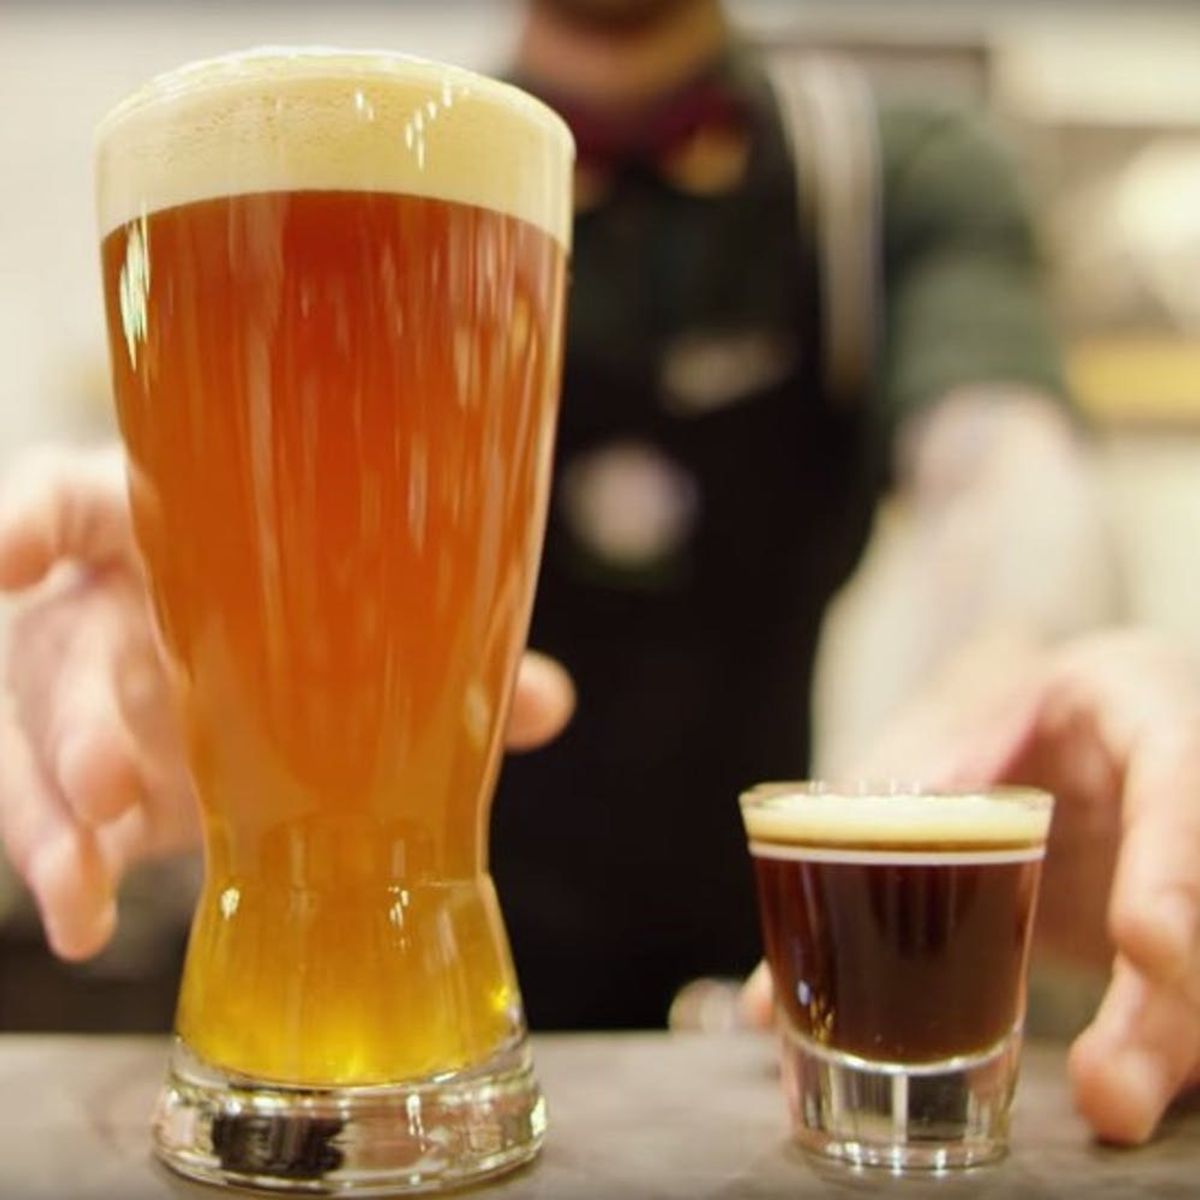 You Can Now Order BEER at Starbucks